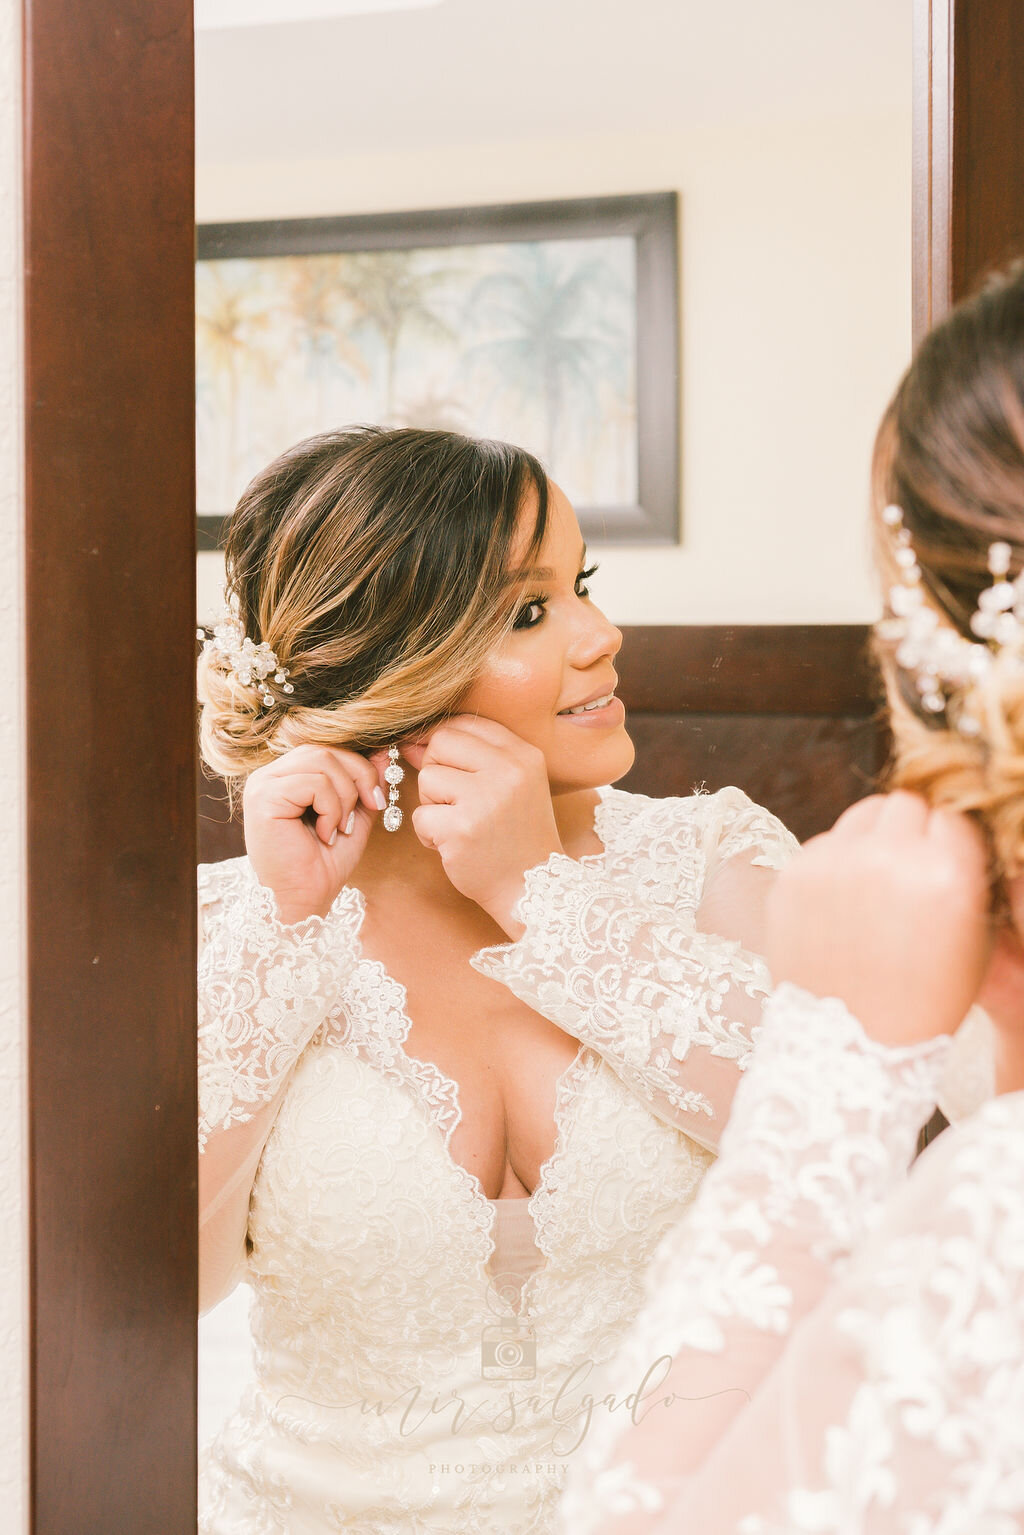 getting-ready-for-the-big-day-wedding-pictures, the-big-day-wedding-photos, wedding-jewelry-for-the-wedding, wedding-earrings